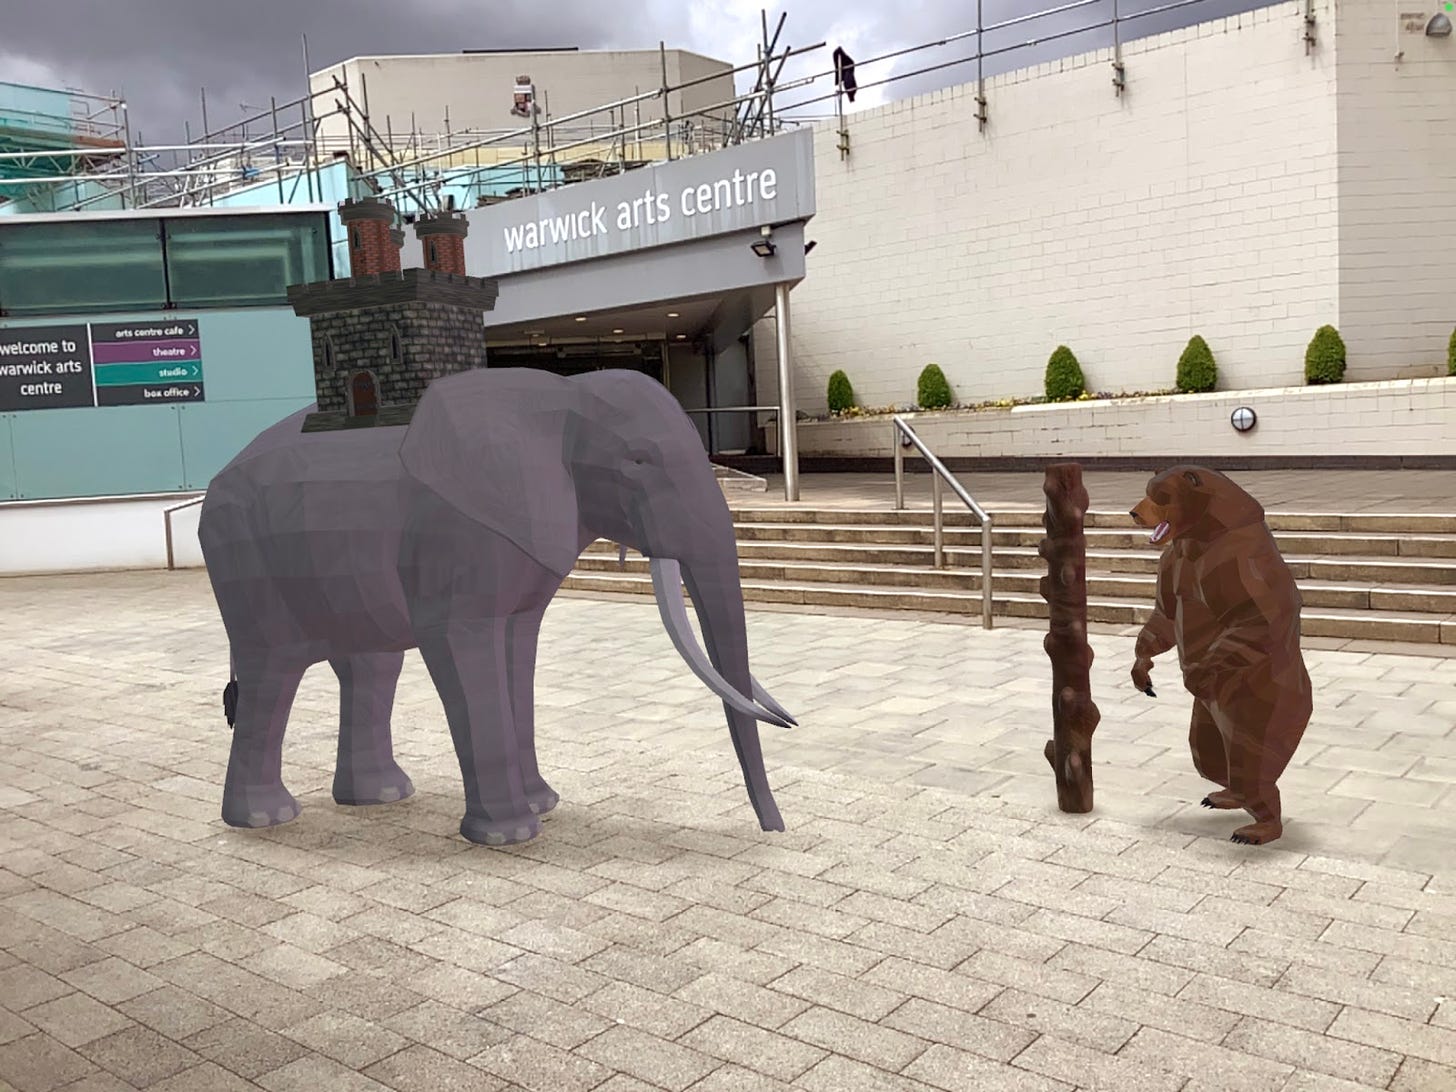 a photograph showing a 3D bear and elephant viewed outside of Warwick Arts Centre using augmented reality technology